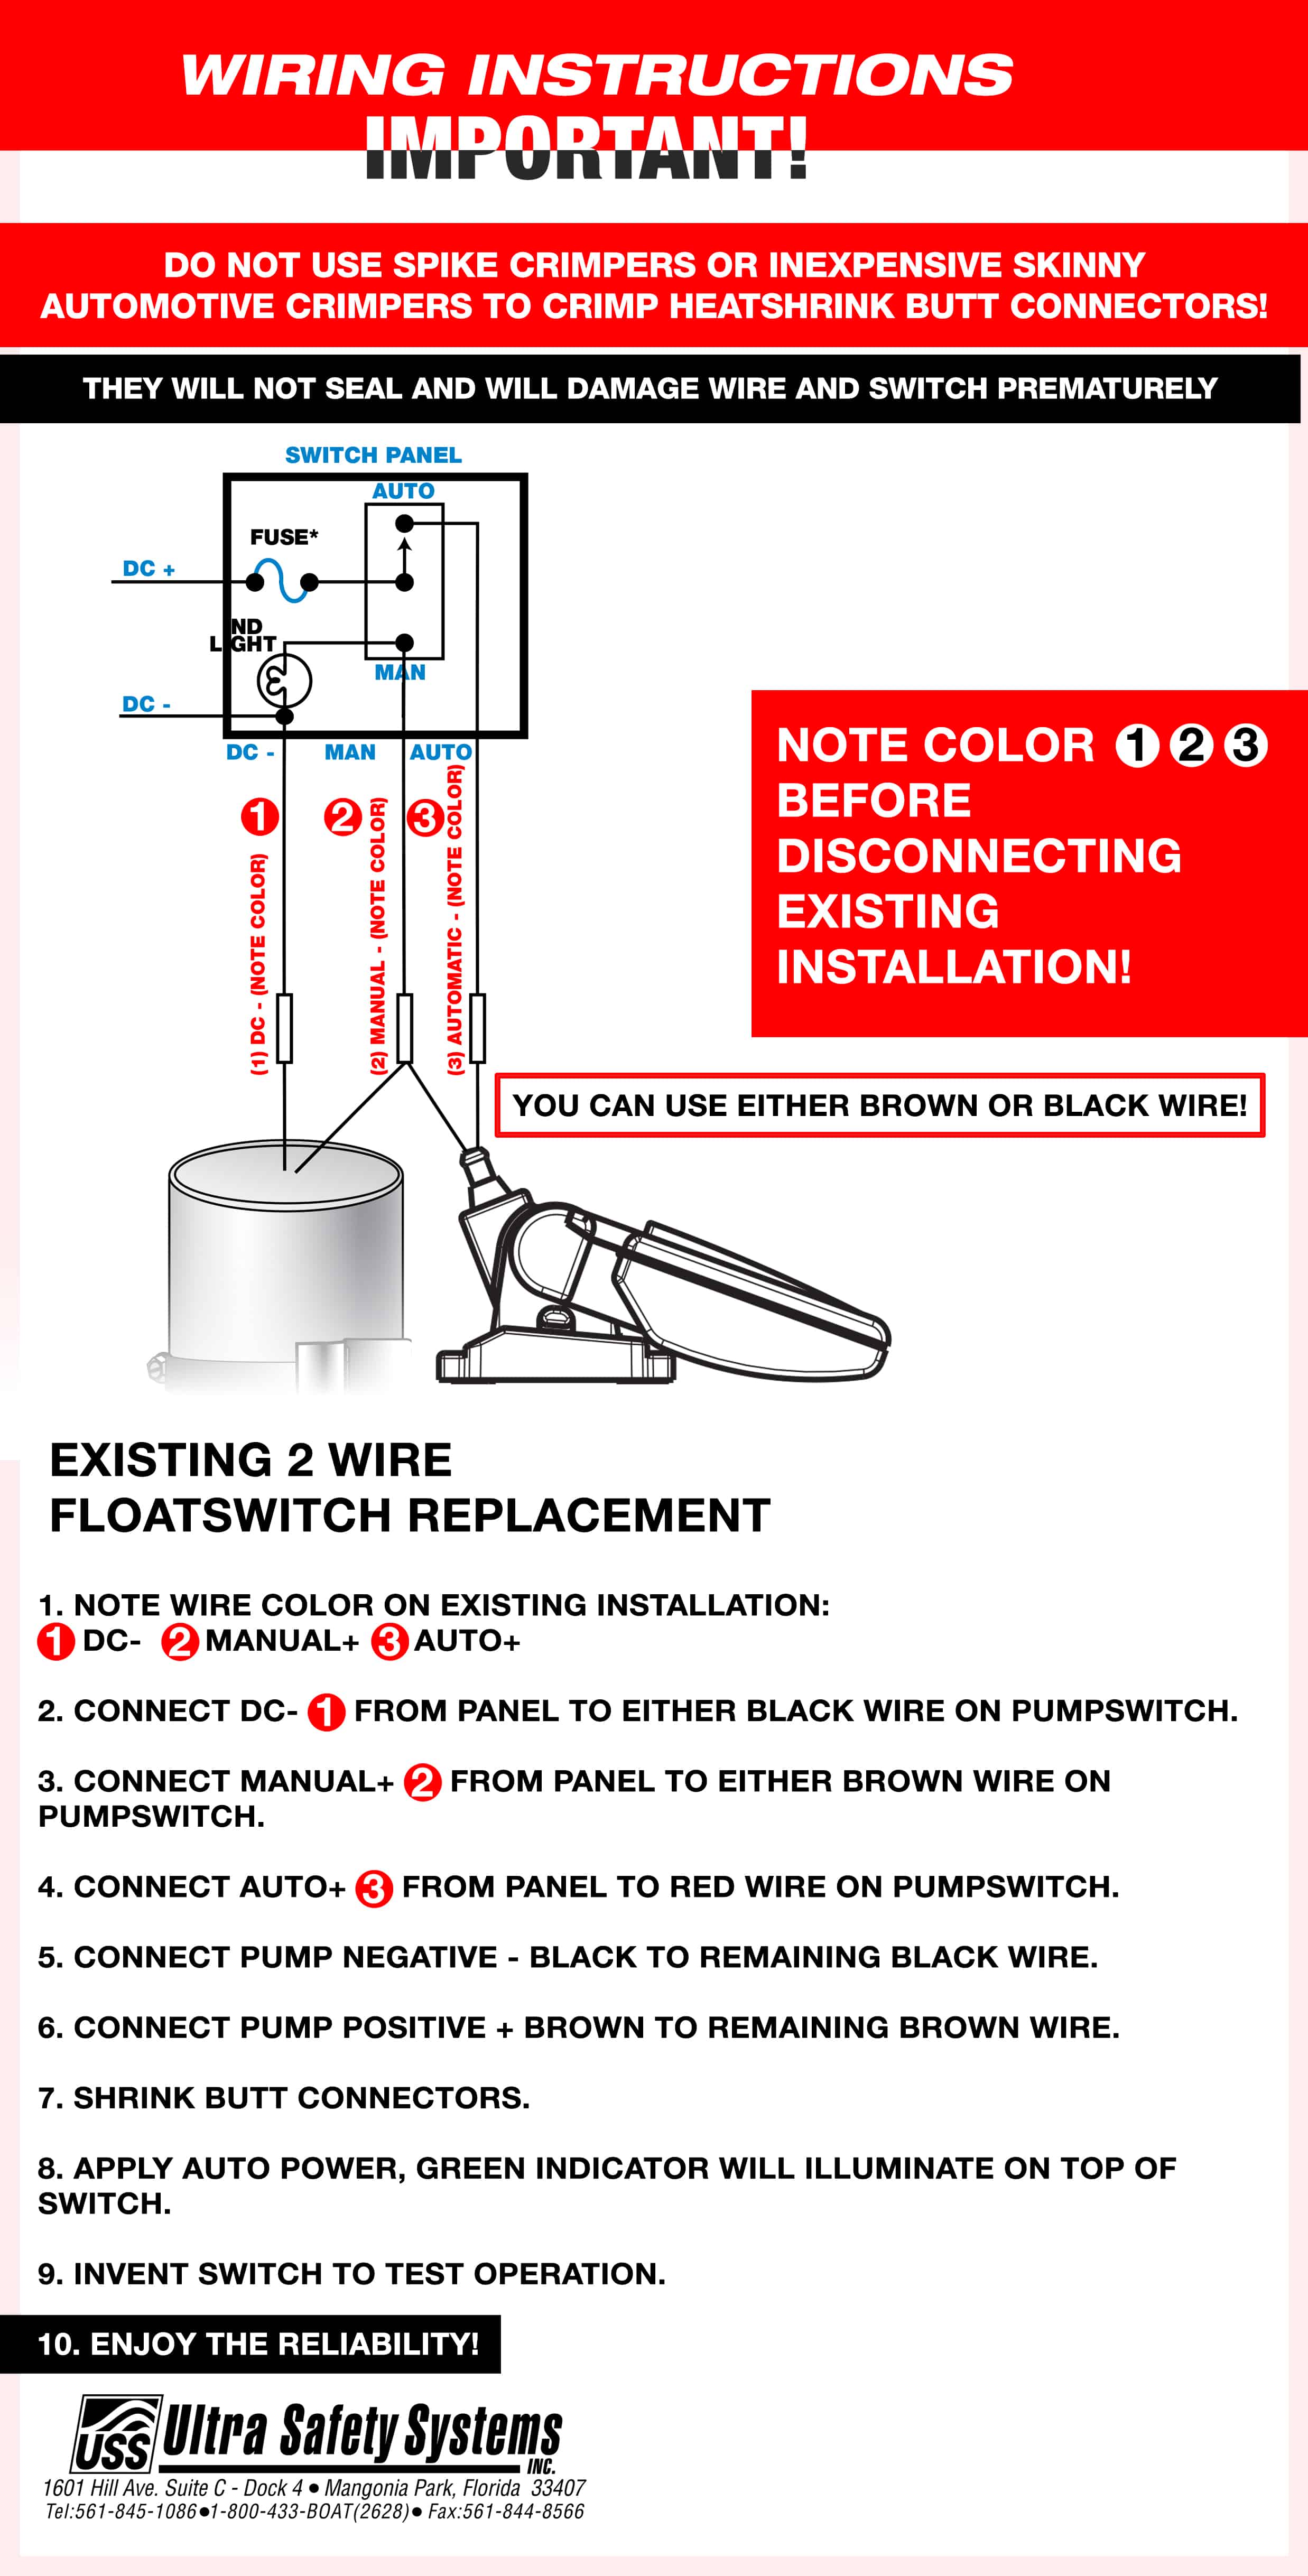 WIRING INSTRUCTIONS